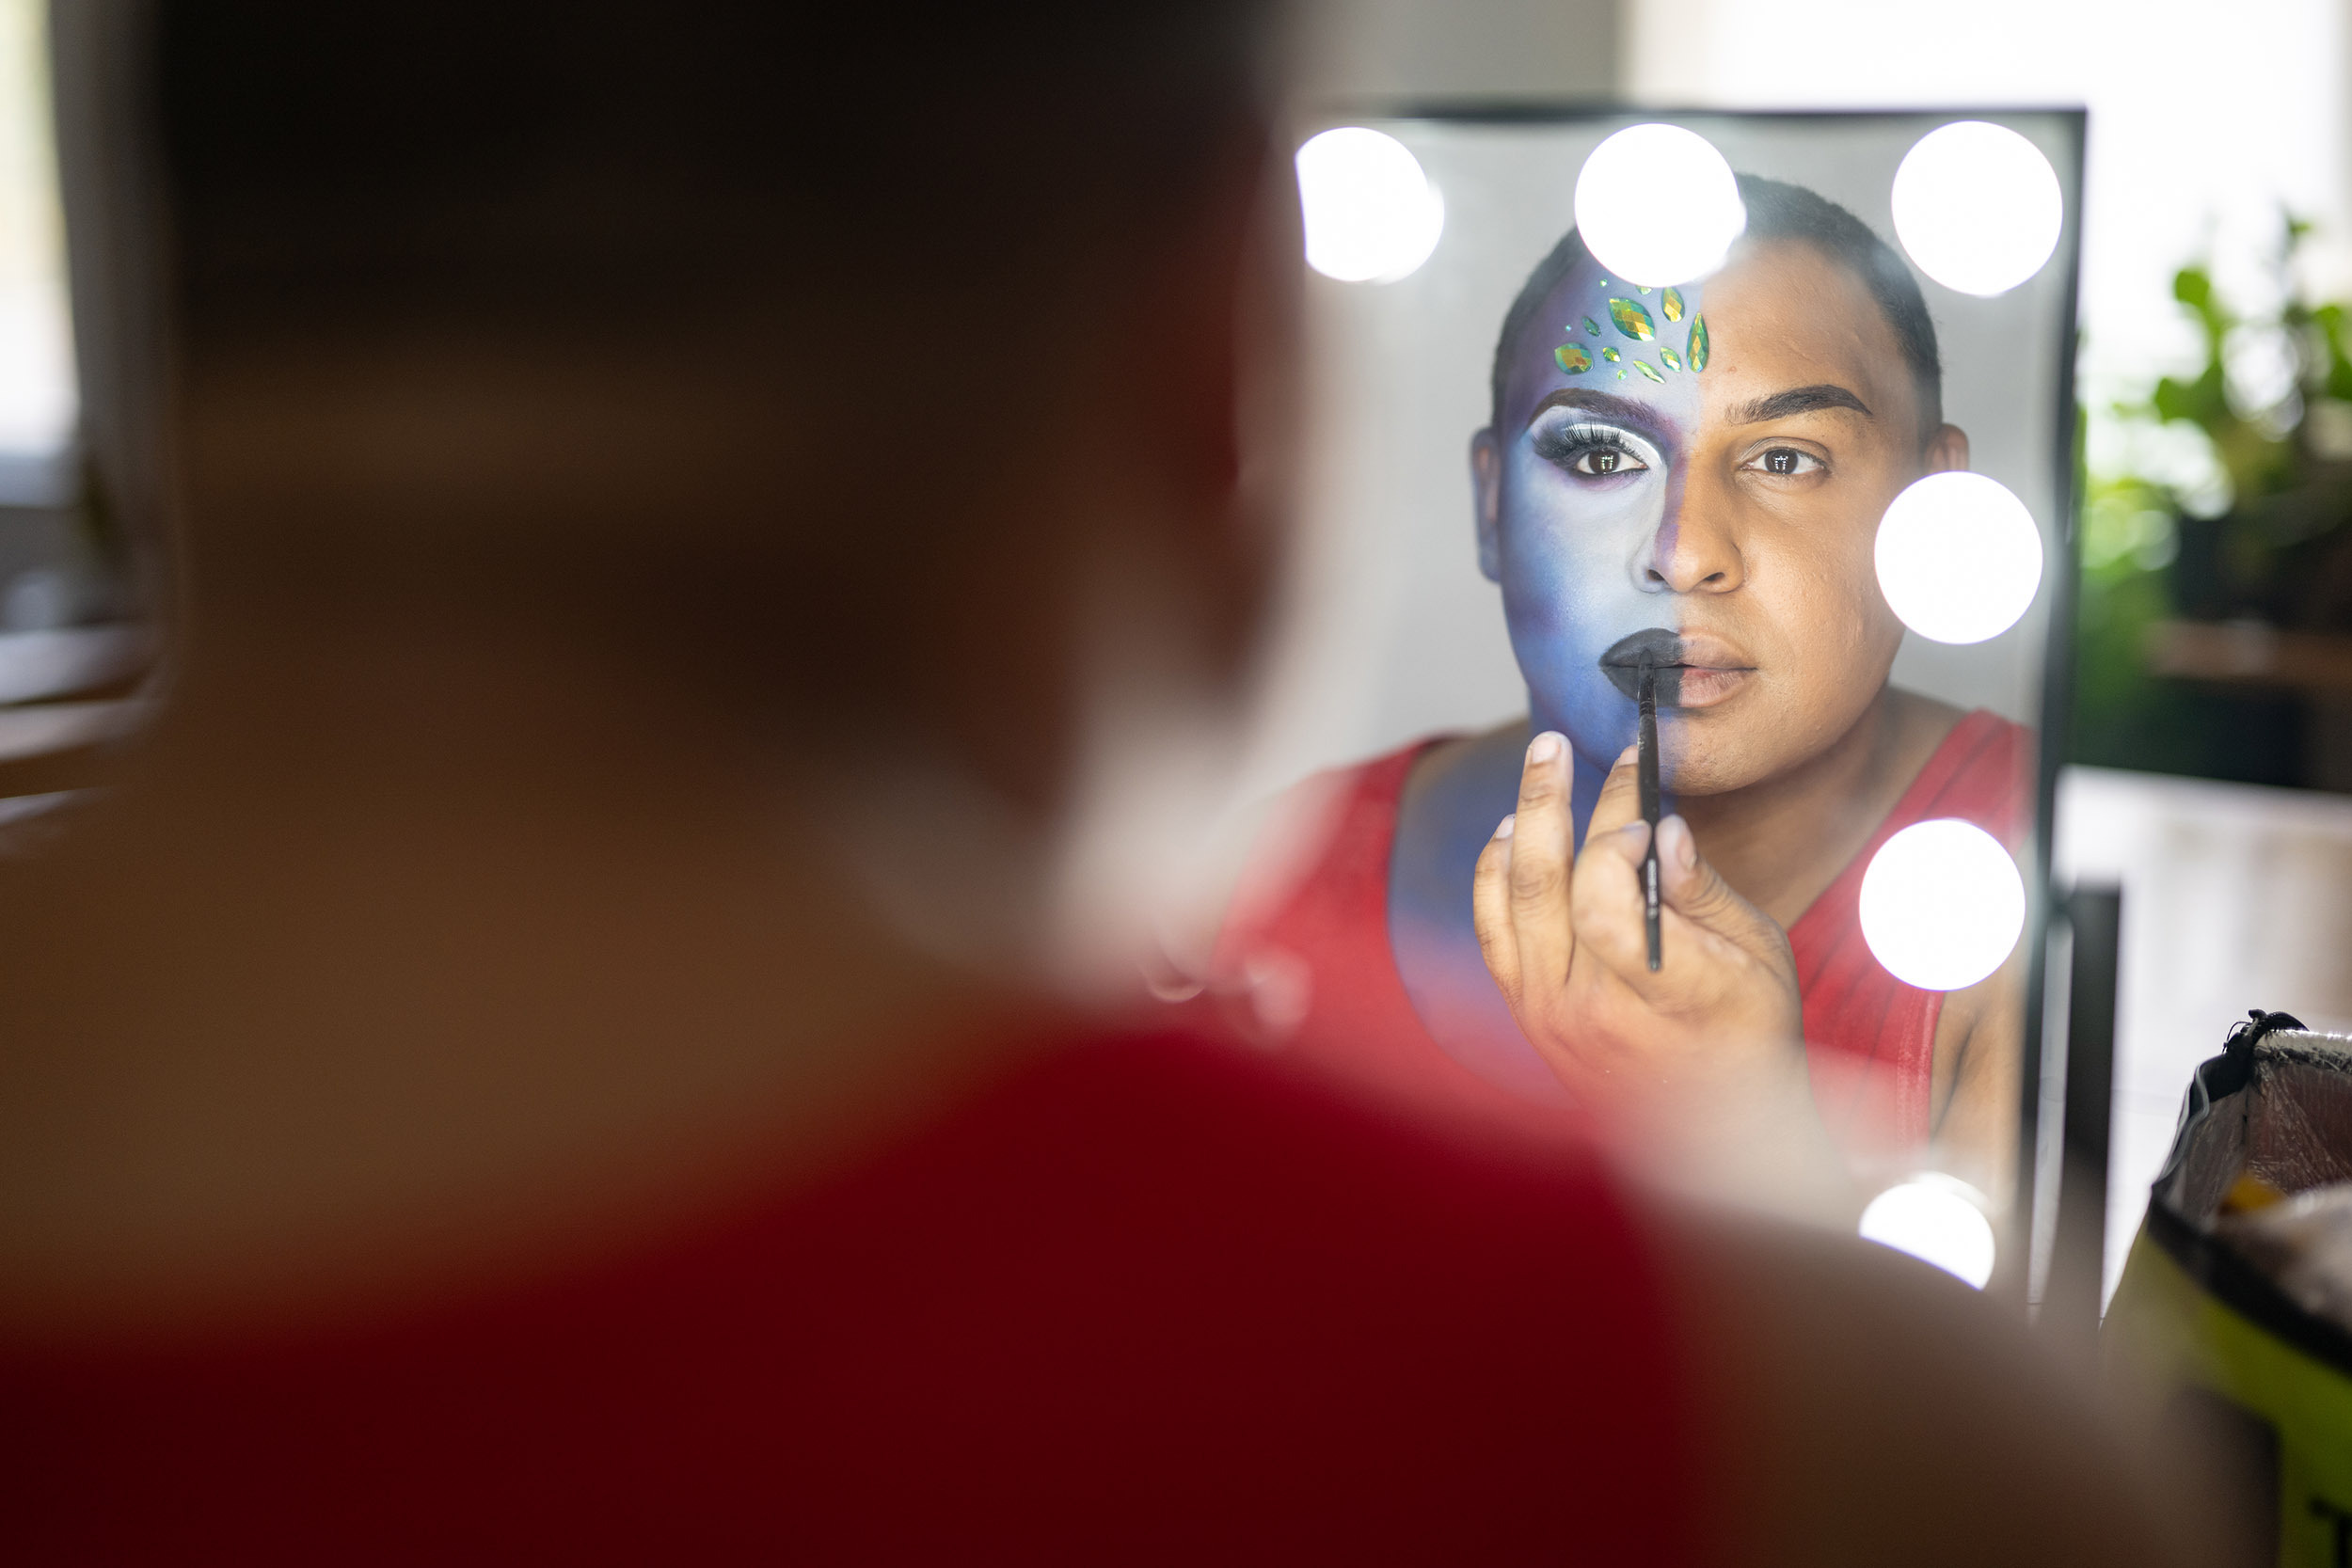 Reflection of Voyages Featured Artist Devon Vaow Applying Blue Makeup to One Side of His Face in a Mirror